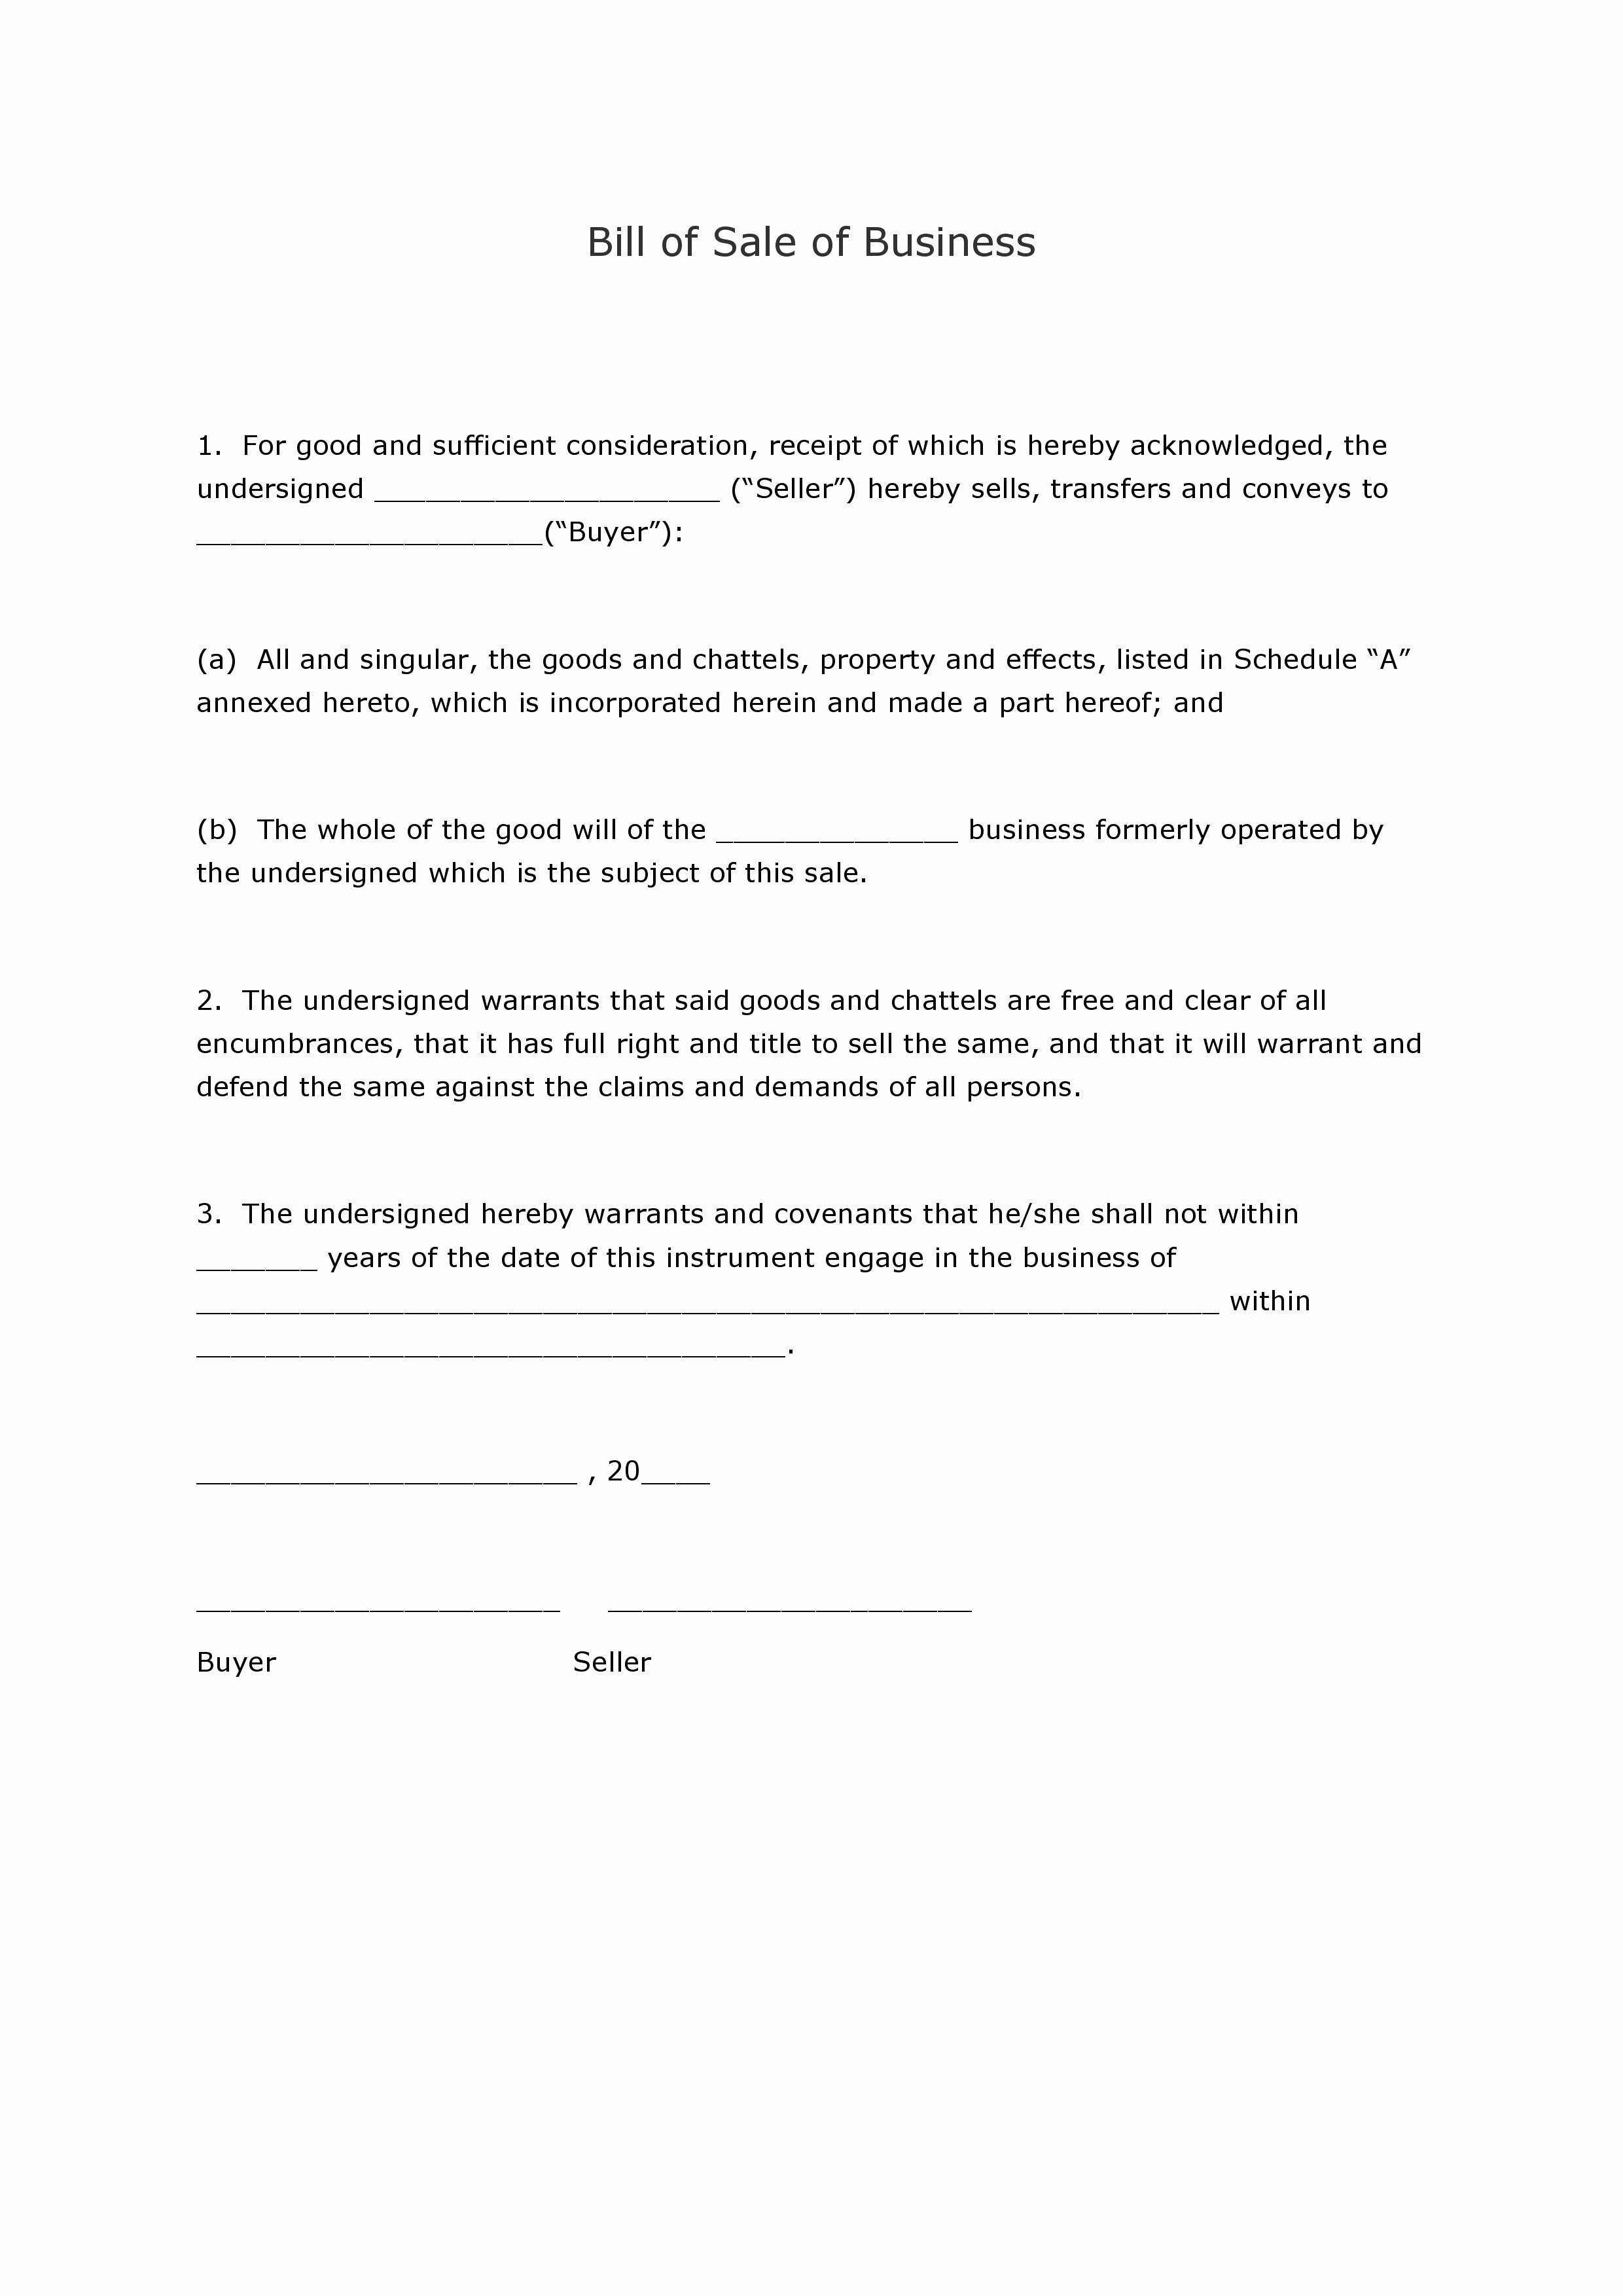 Business Bill Of Sale Example Fresh Free Business Bill Of Sale form Pdf Word